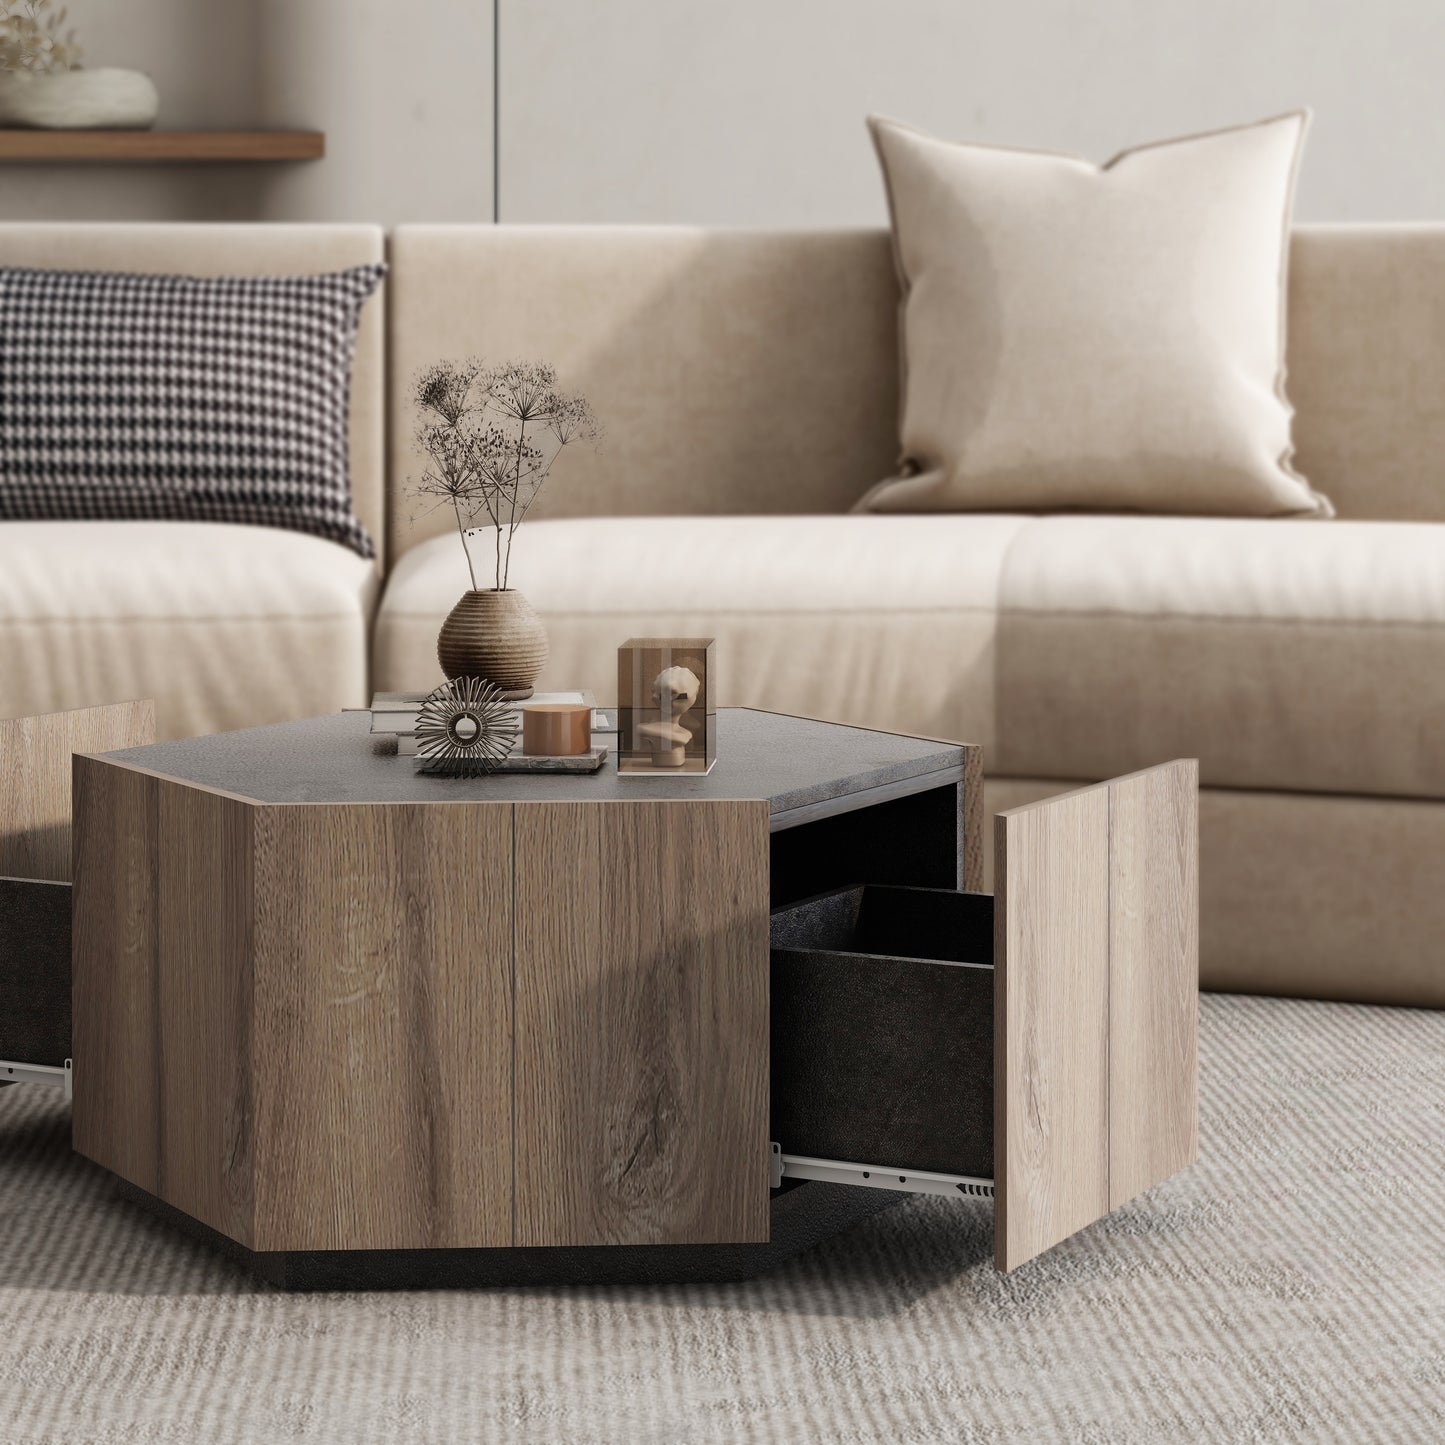 Hexagonal Rural Style Garden Retro Living Room Coffee Table with 2 drawers, Textured Black + Warm Oak